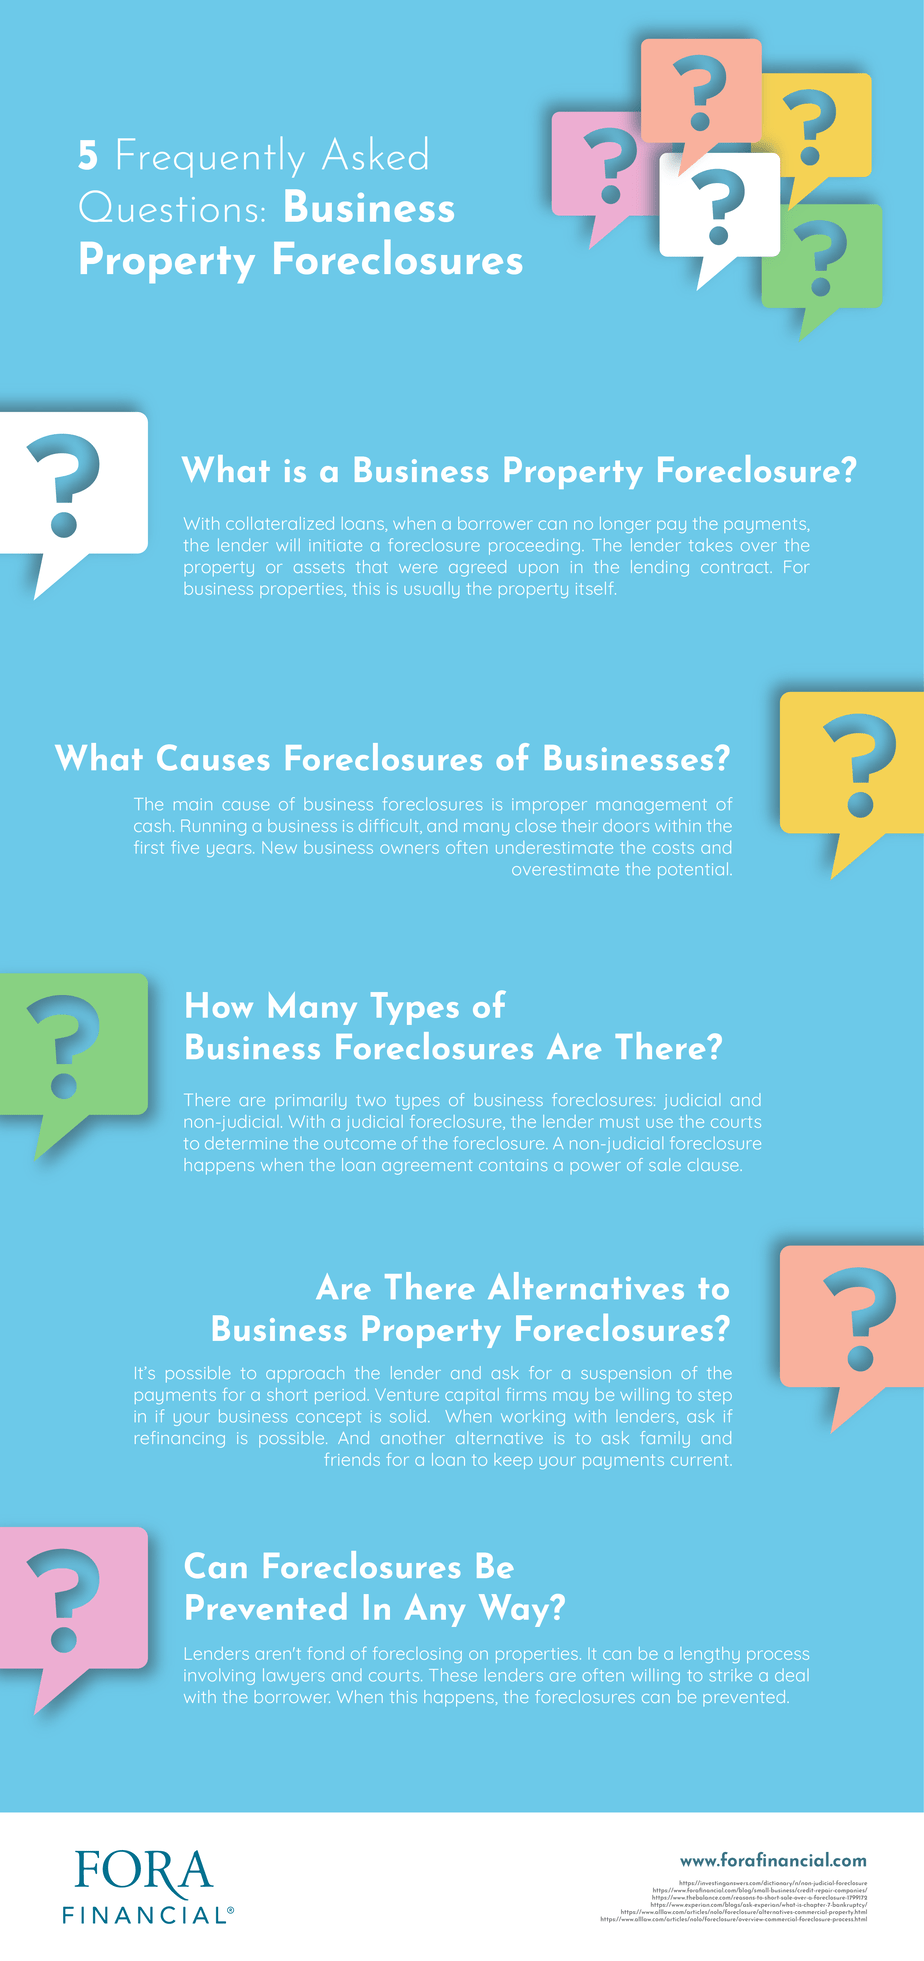 Are There Alternatives to Business Property Foreclosures?